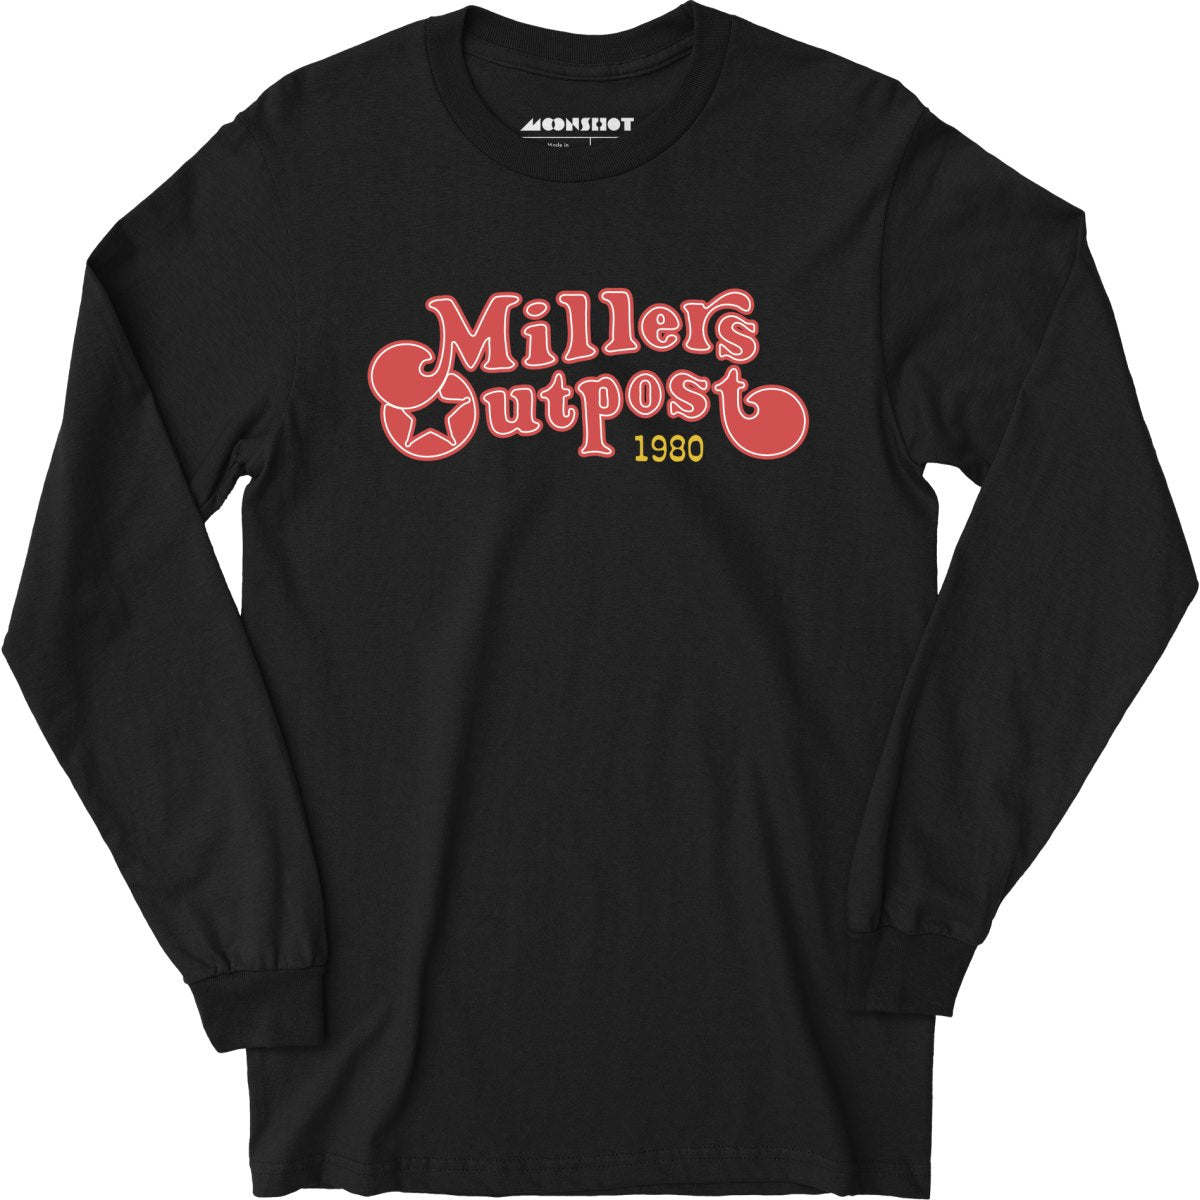 Millers Outpost - Long Sleeve T-Shirt – m00nshot